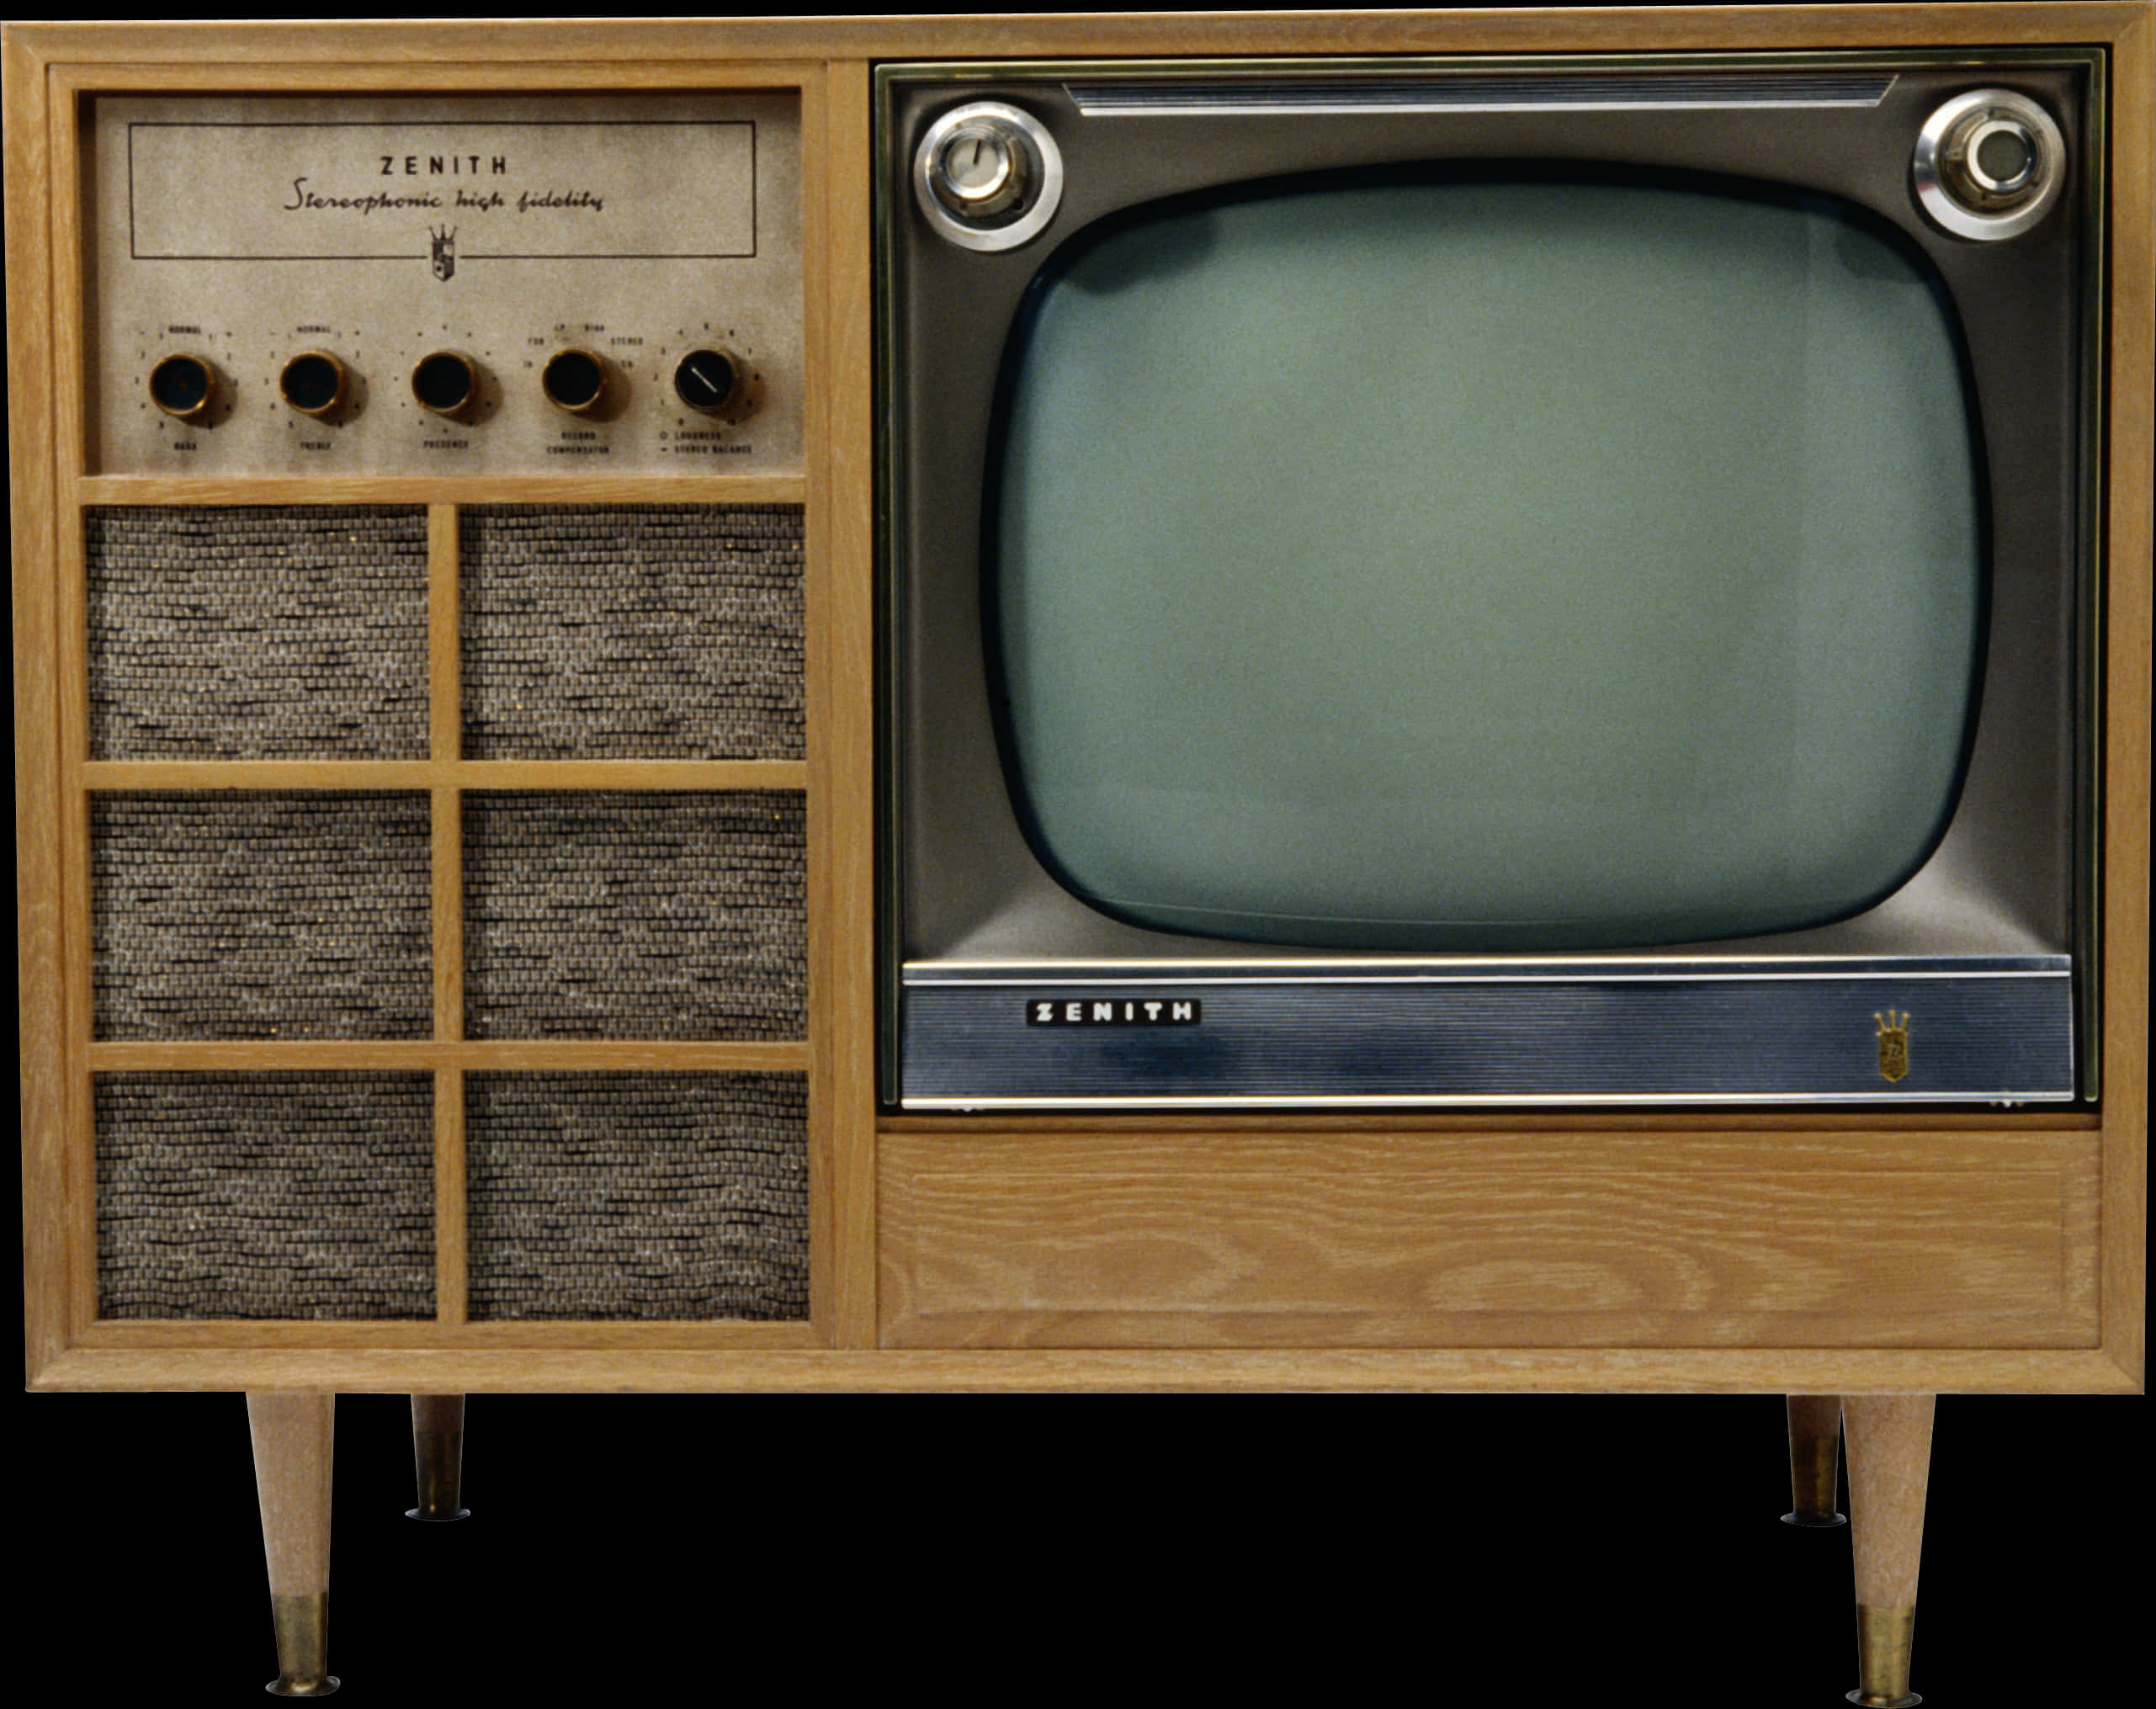 An Old Television With A Wooden Cabinet